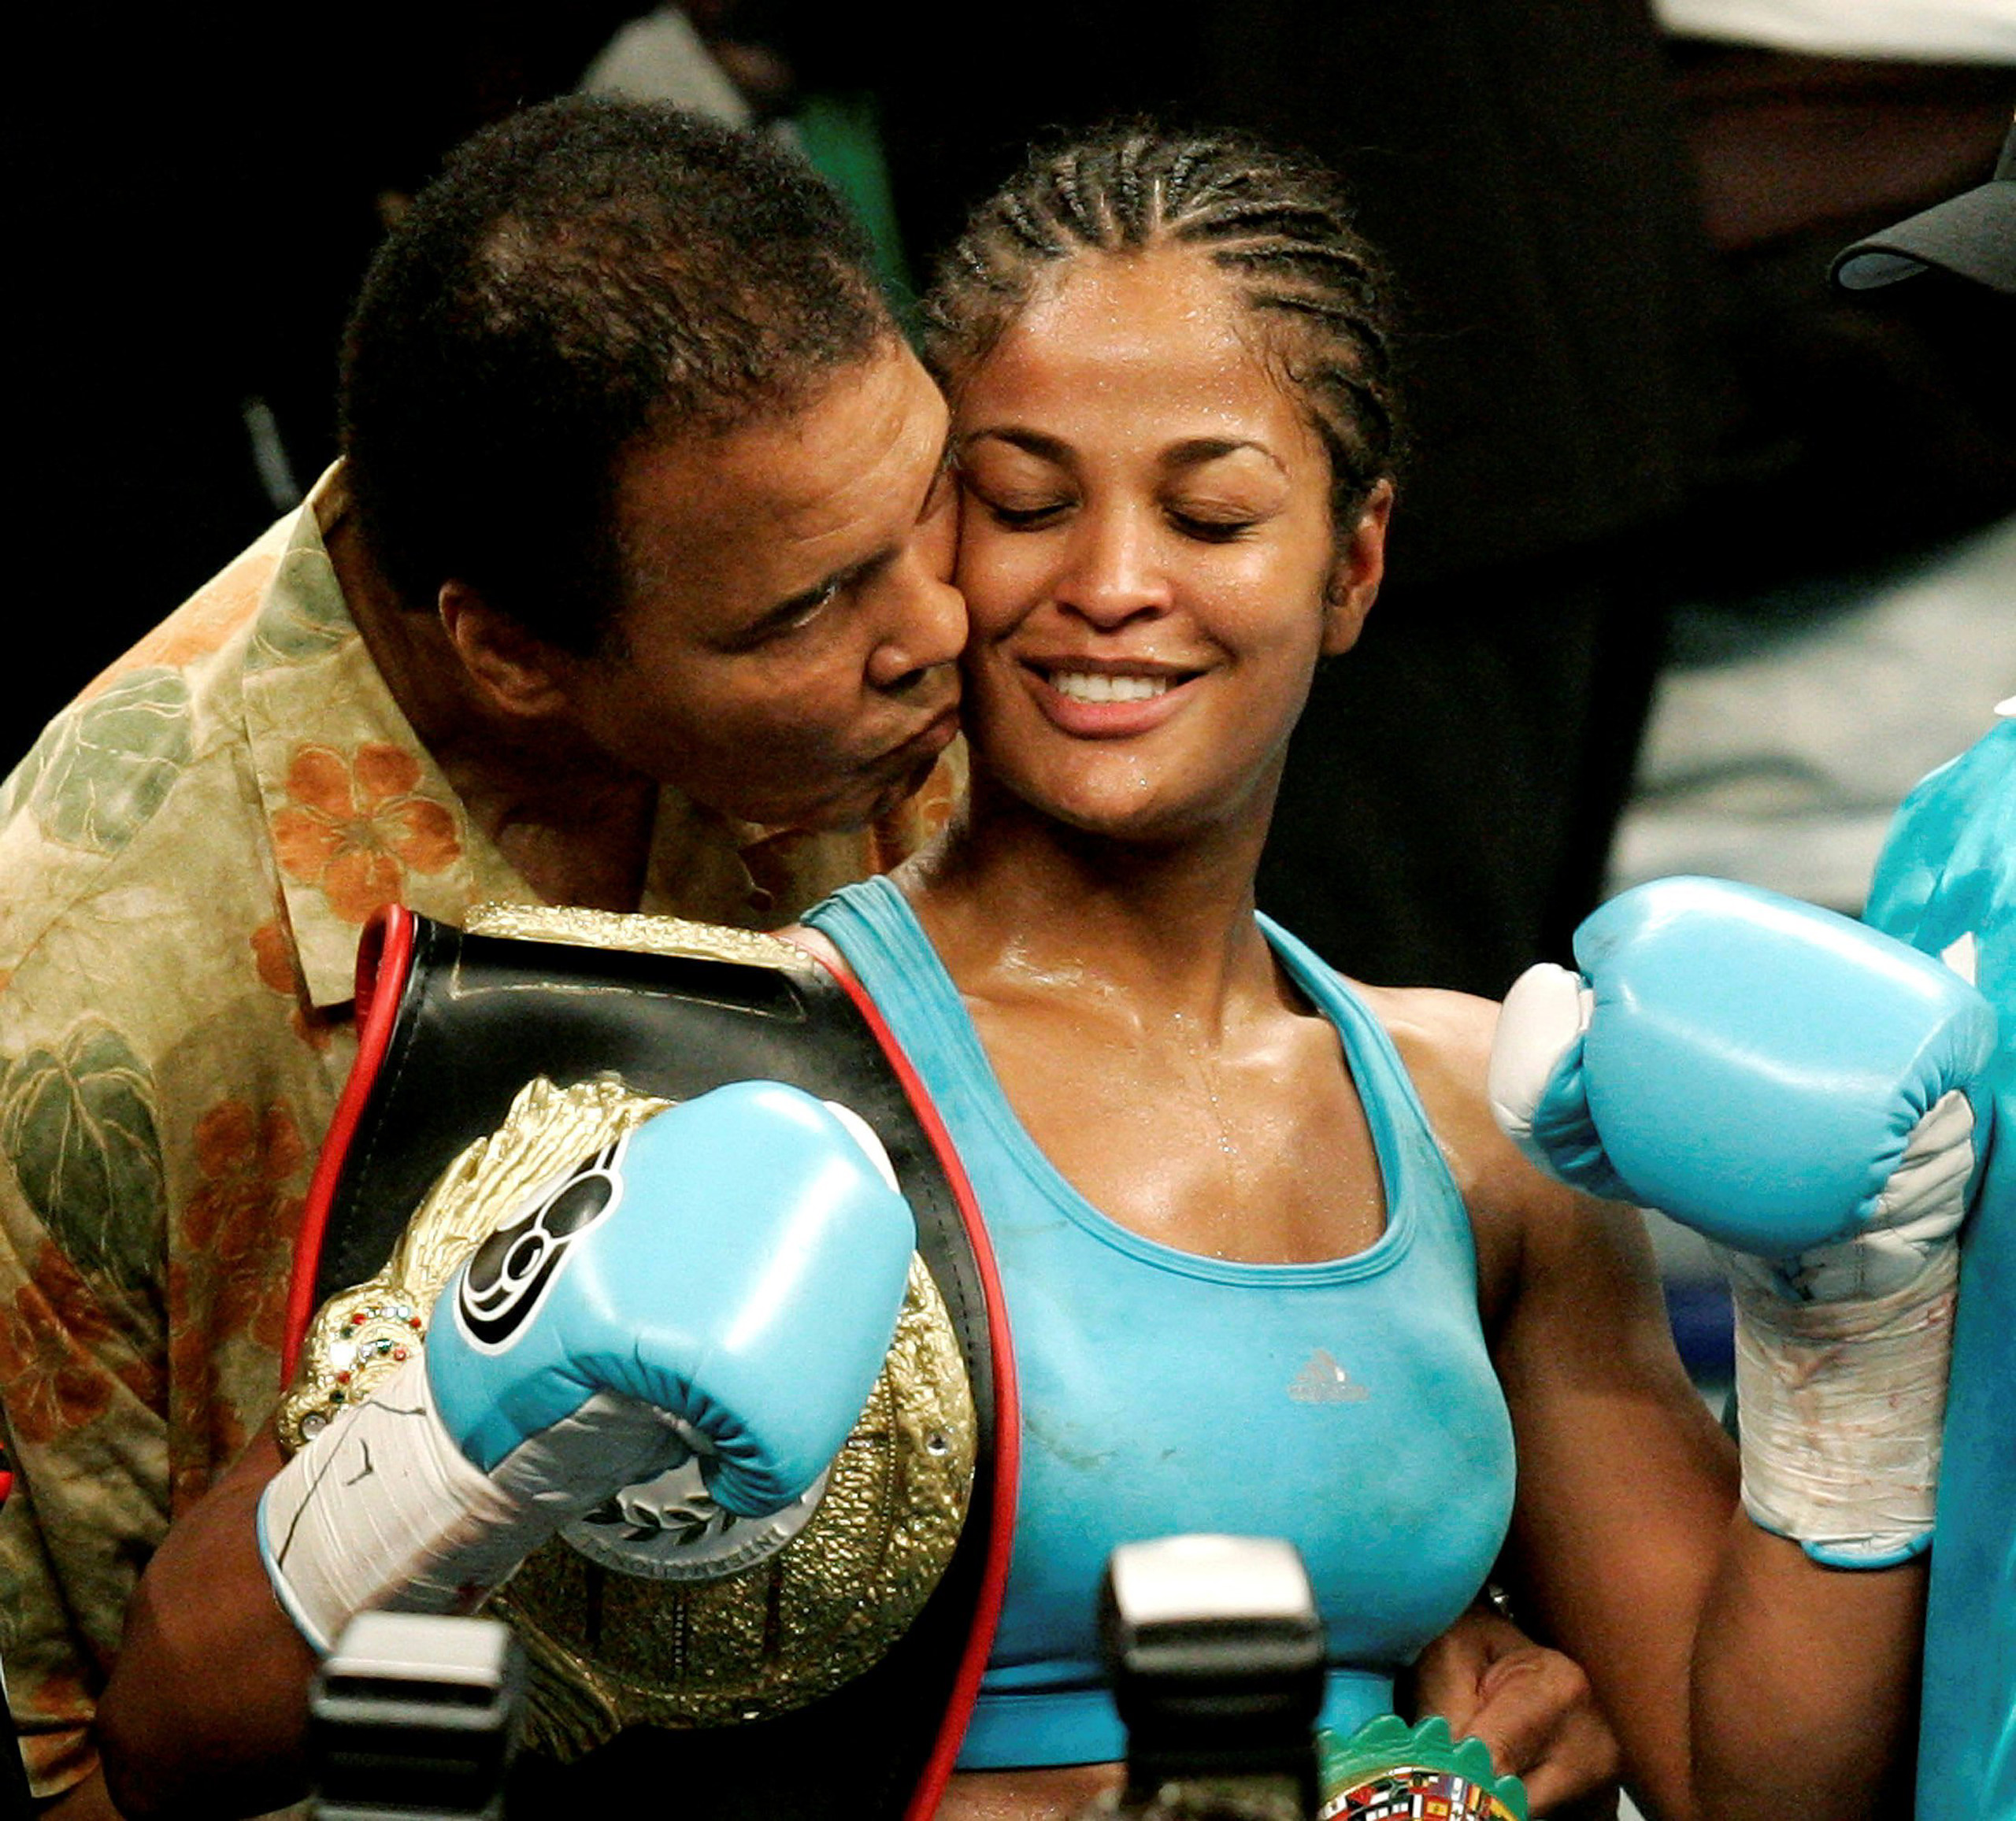 File photo of WBC and WIBA super middleweight champion Laila Ali being kissed by her father, boxing great Muhammad Ali, at the MCI Center in Washington